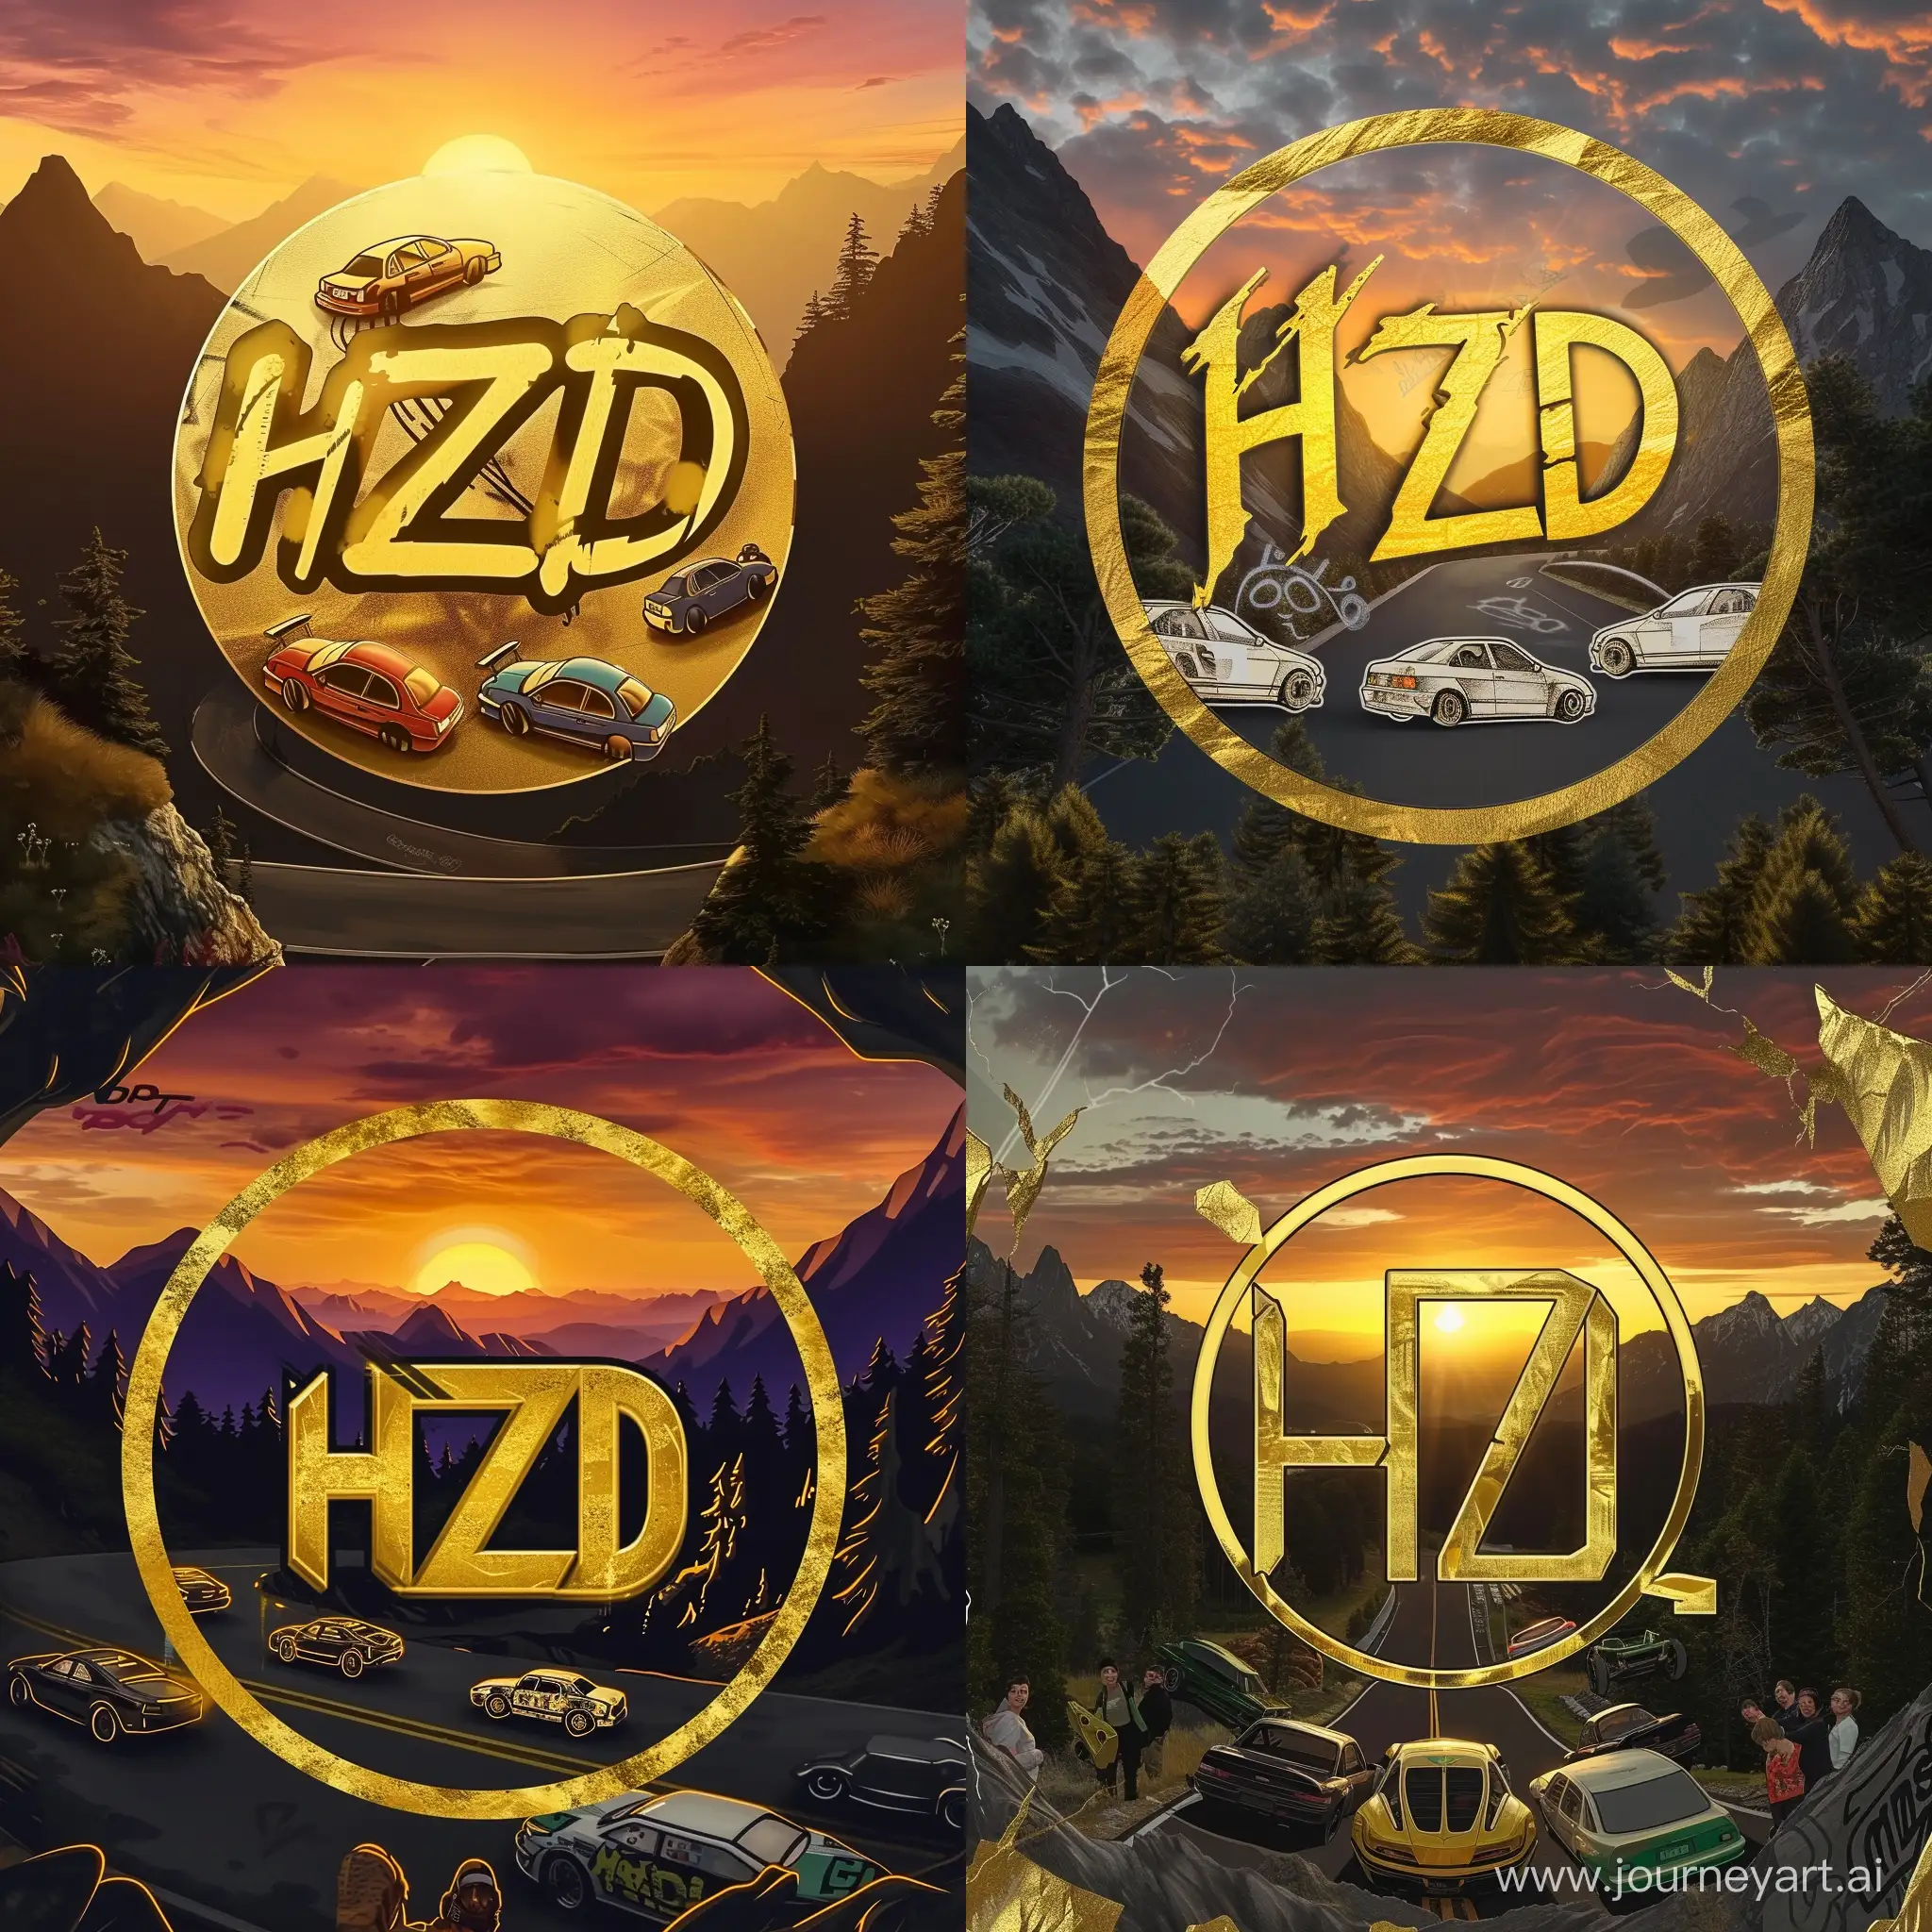 child draw style car downhill race logo in circle shape, sunset, some racing cars, some viewers around road, gold color, child style look, HZD tag, graffiti font, mountains with trees with road in backround